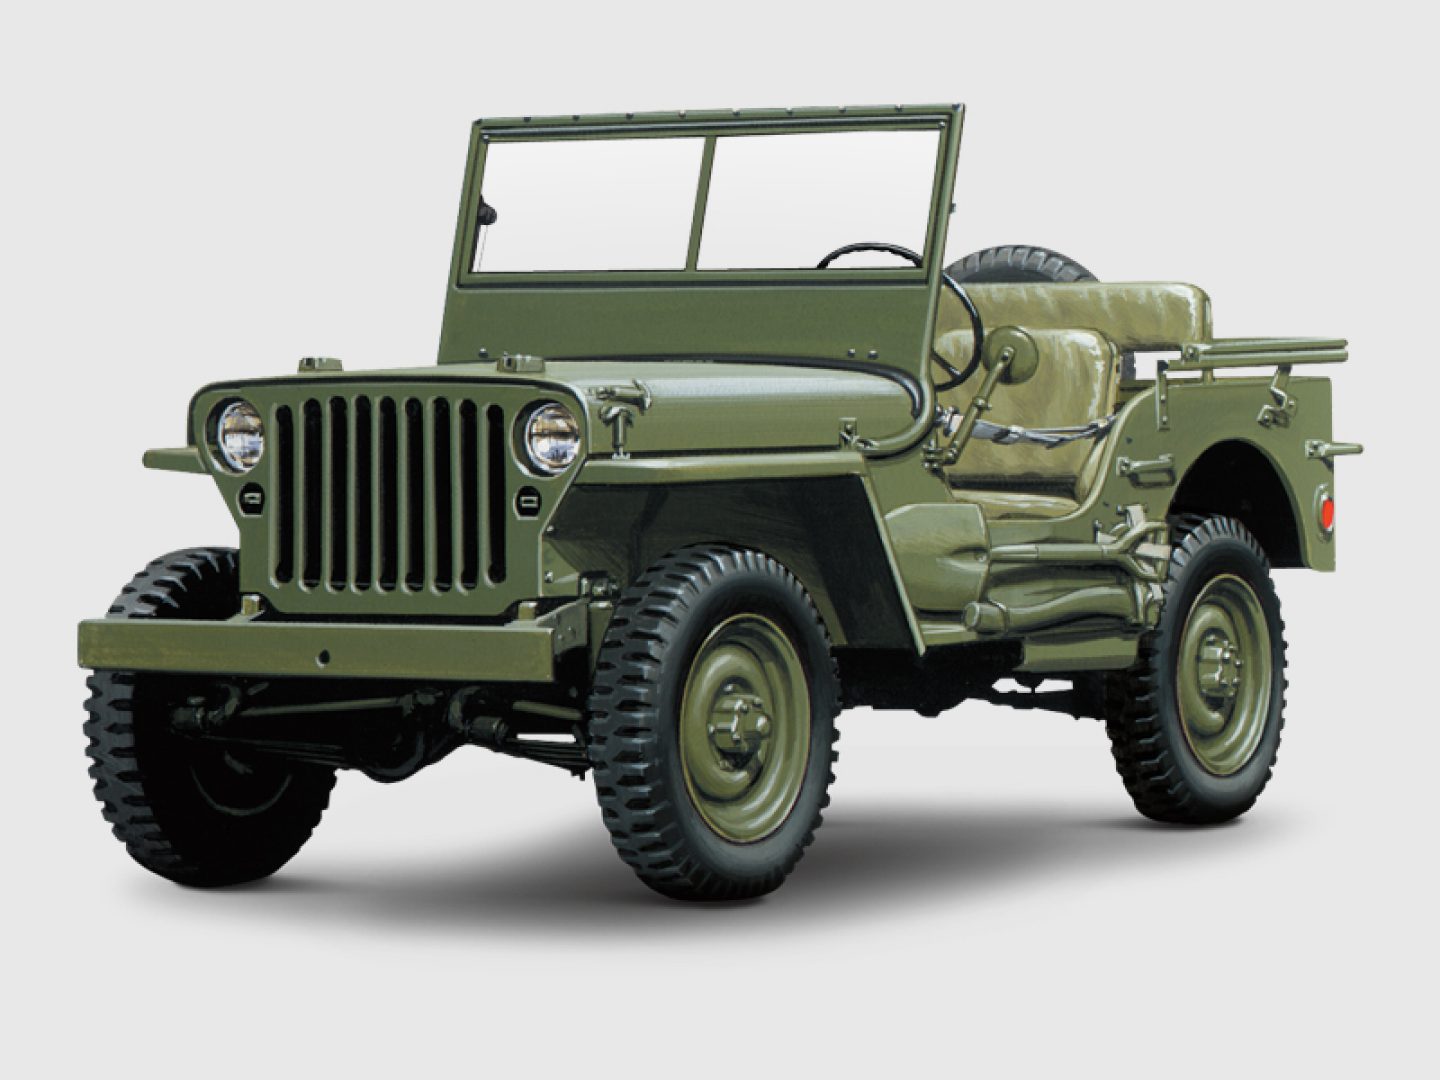 1940s - Jeep History | The Story Of The Legend | Jeep® UK